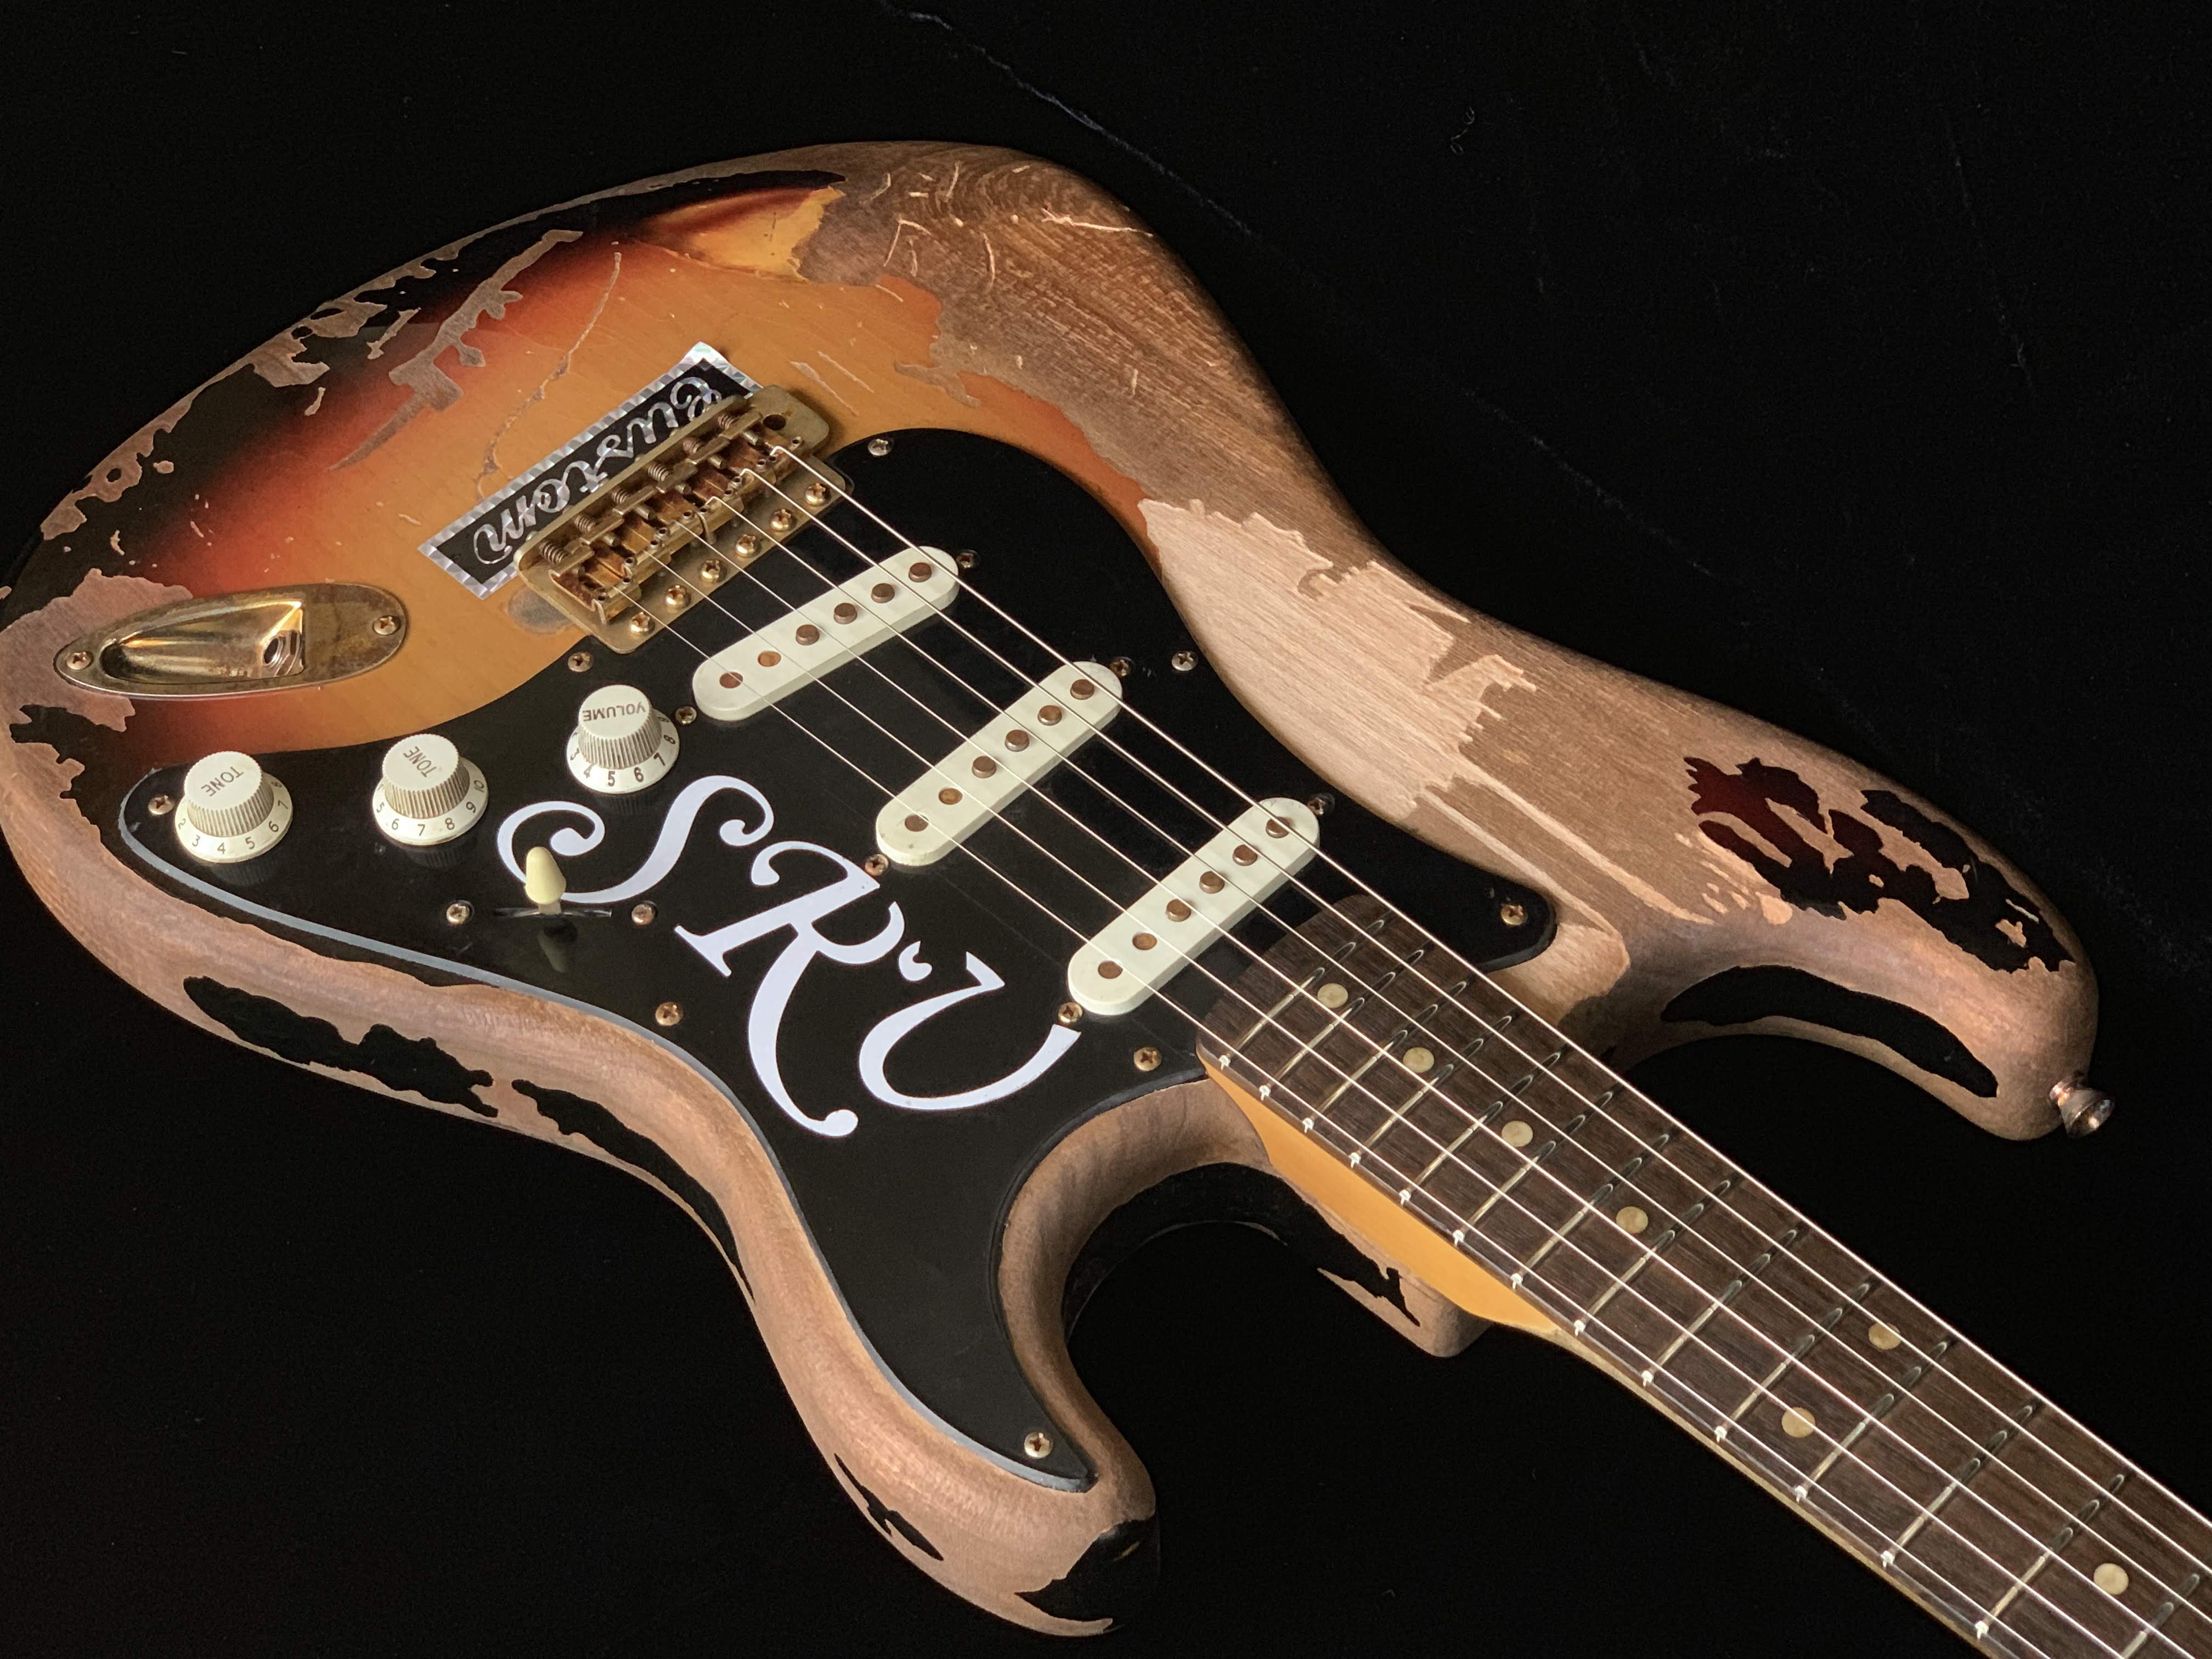 Remodeled Stevie Ray Vaughan Number One Aged Parts A0408007